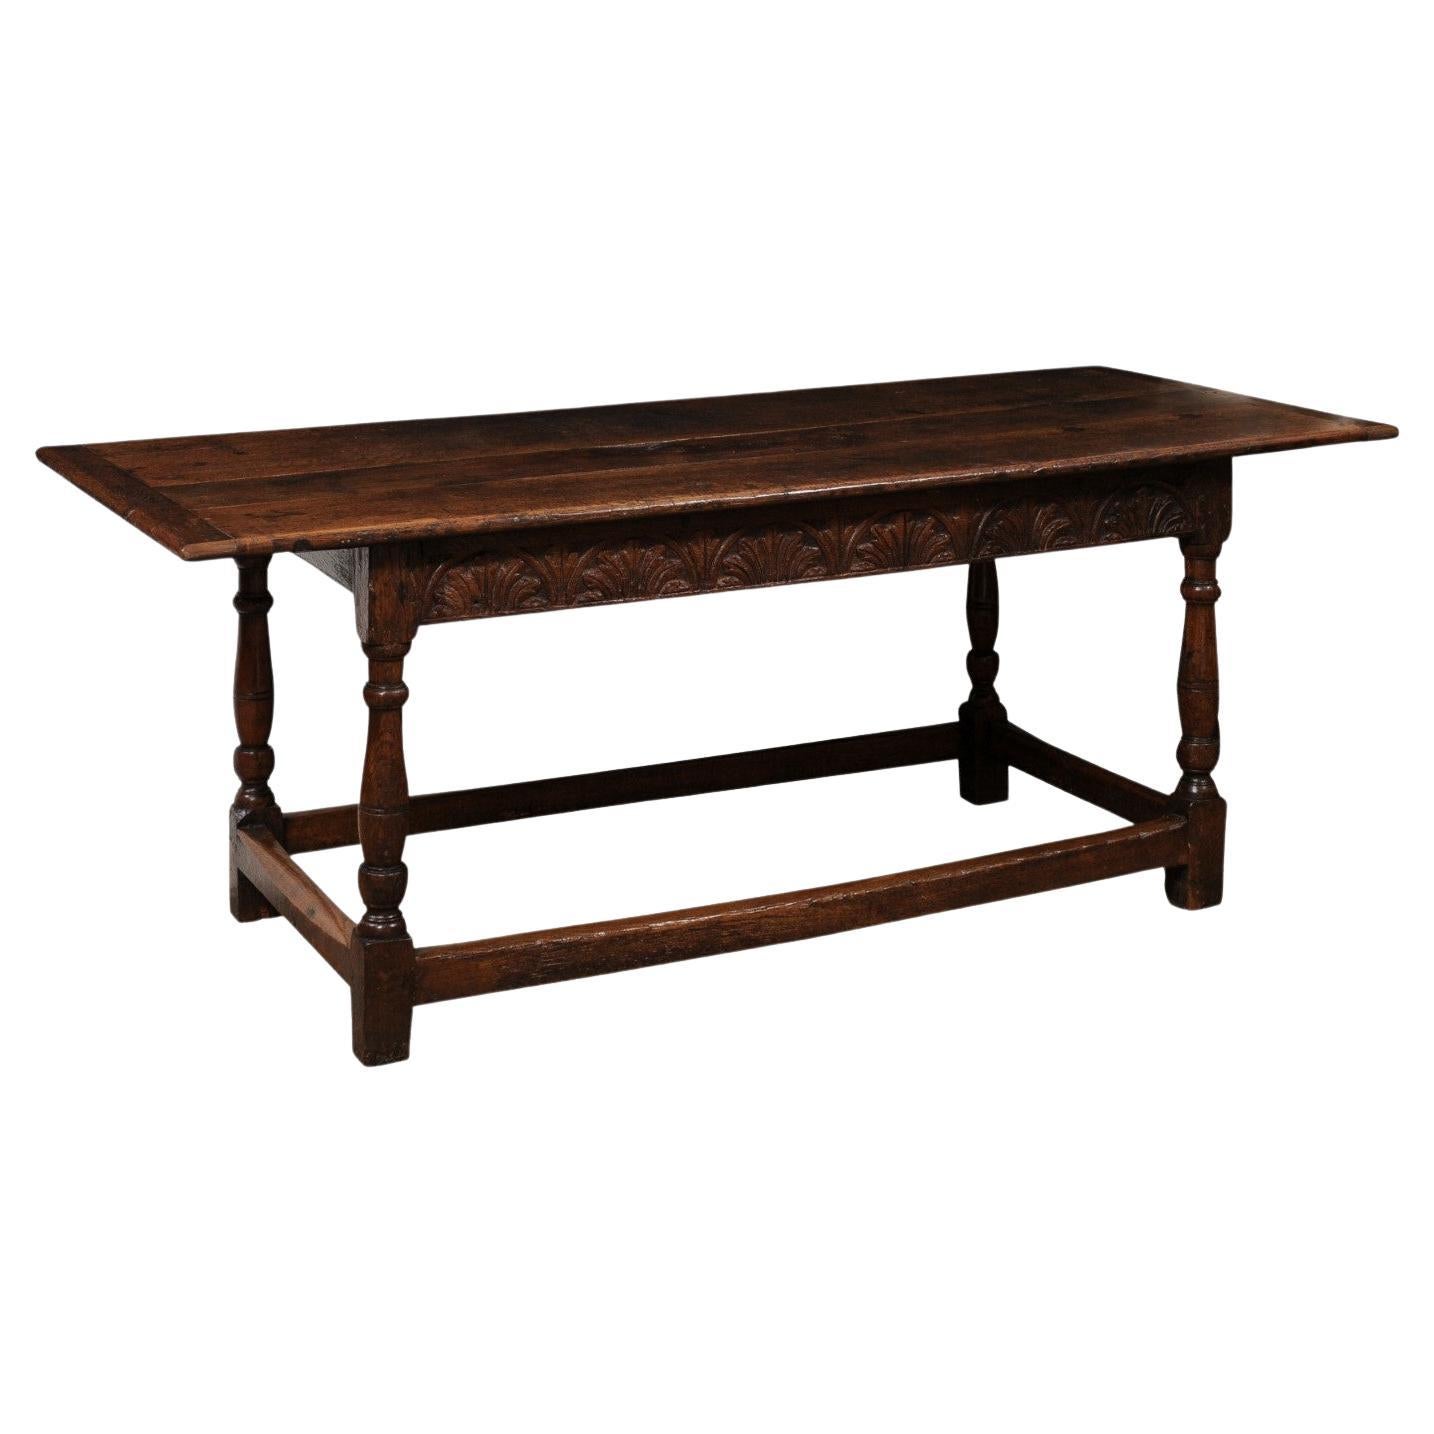  Early 18th Century English Long Oak Hall Table with Carved Frieze, Turned Legs  For Sale